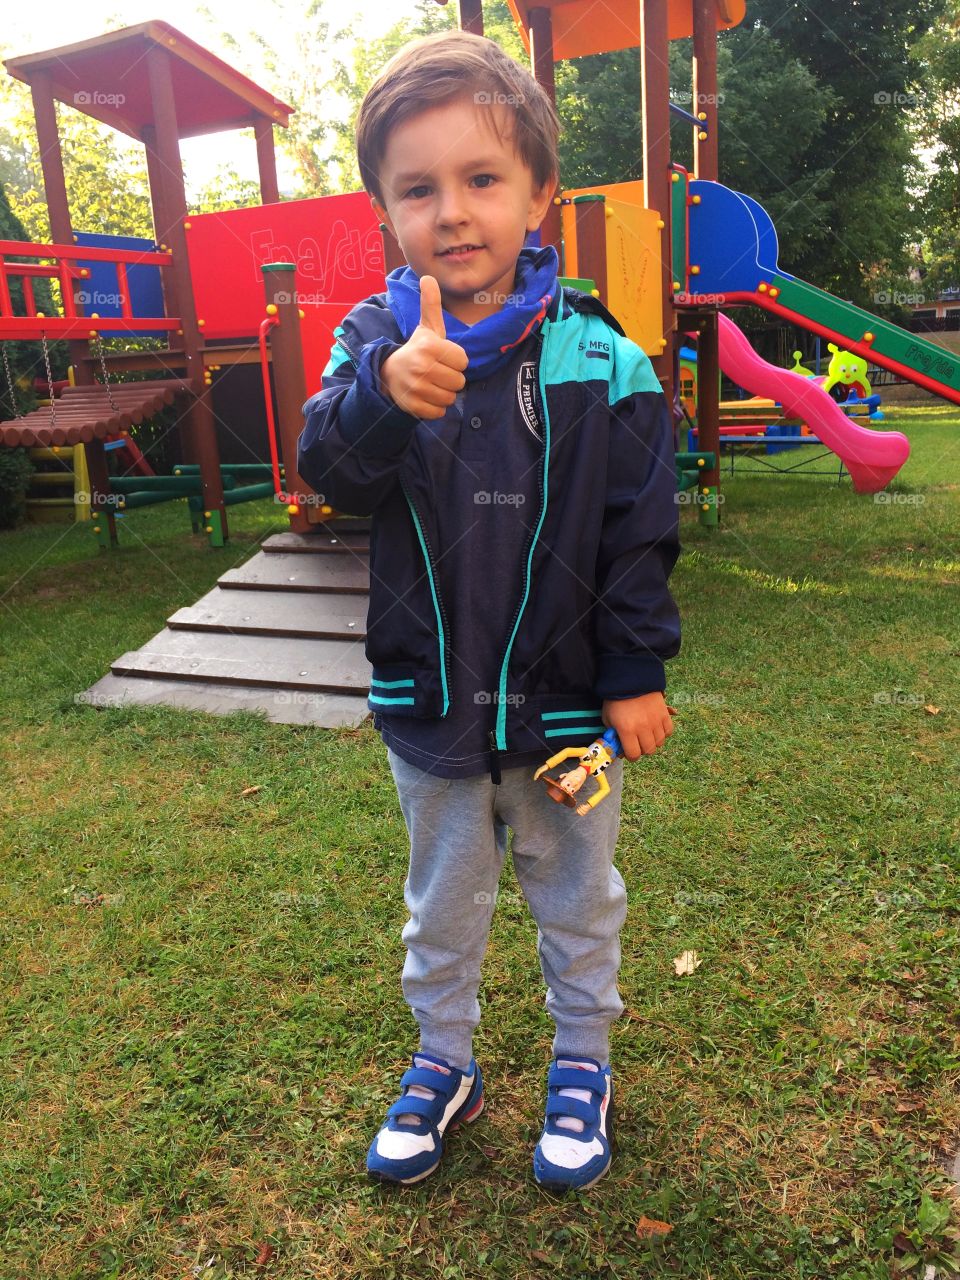 Boy showing thumbs up gesture in playground